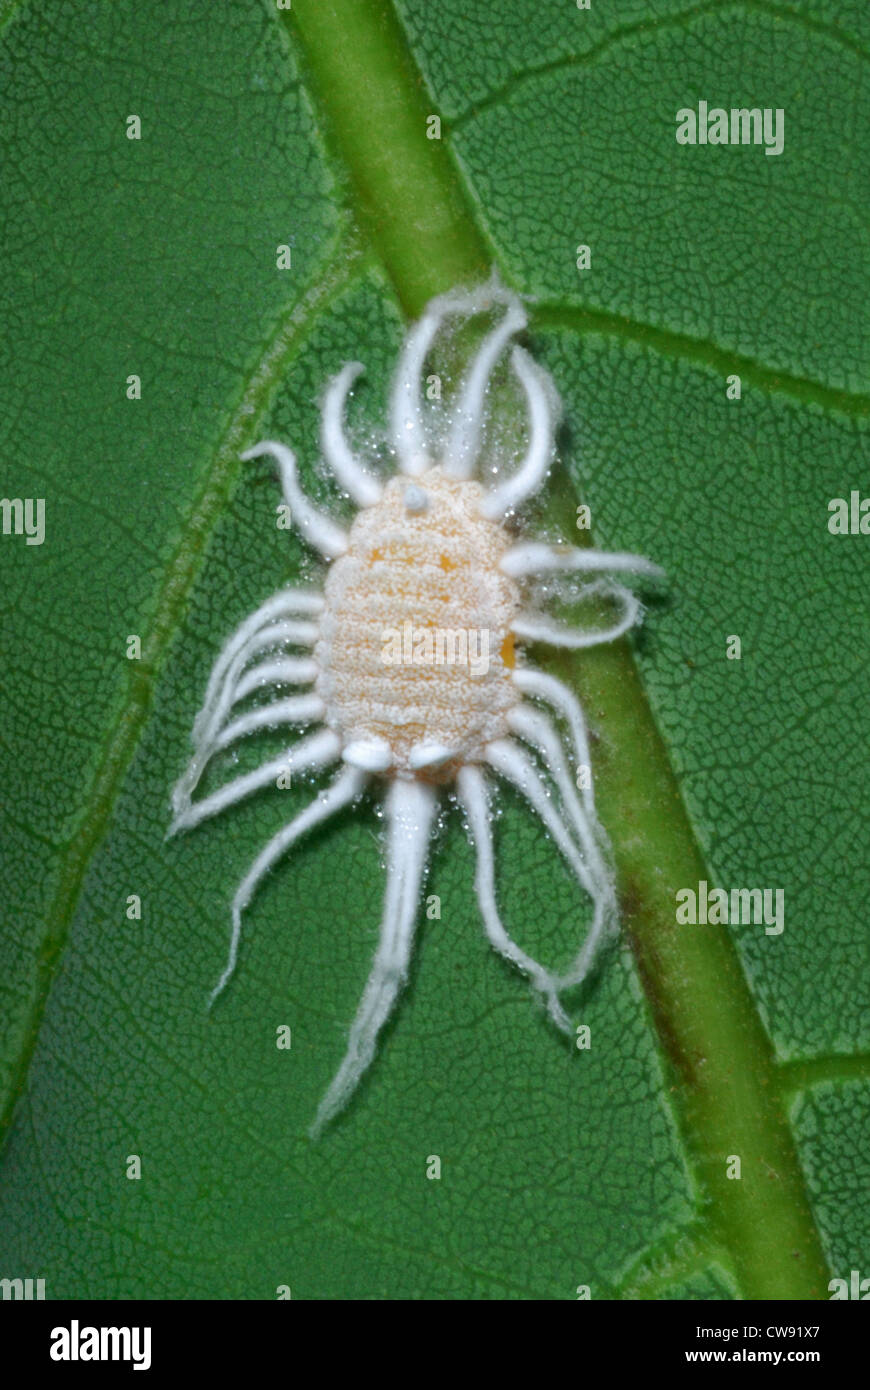 An enormous mealybug (Pseudococcidae sp.) aka scale insect infesting a Guava tree in an orchard in Tak, Thailand. February 2012. Stock Photo